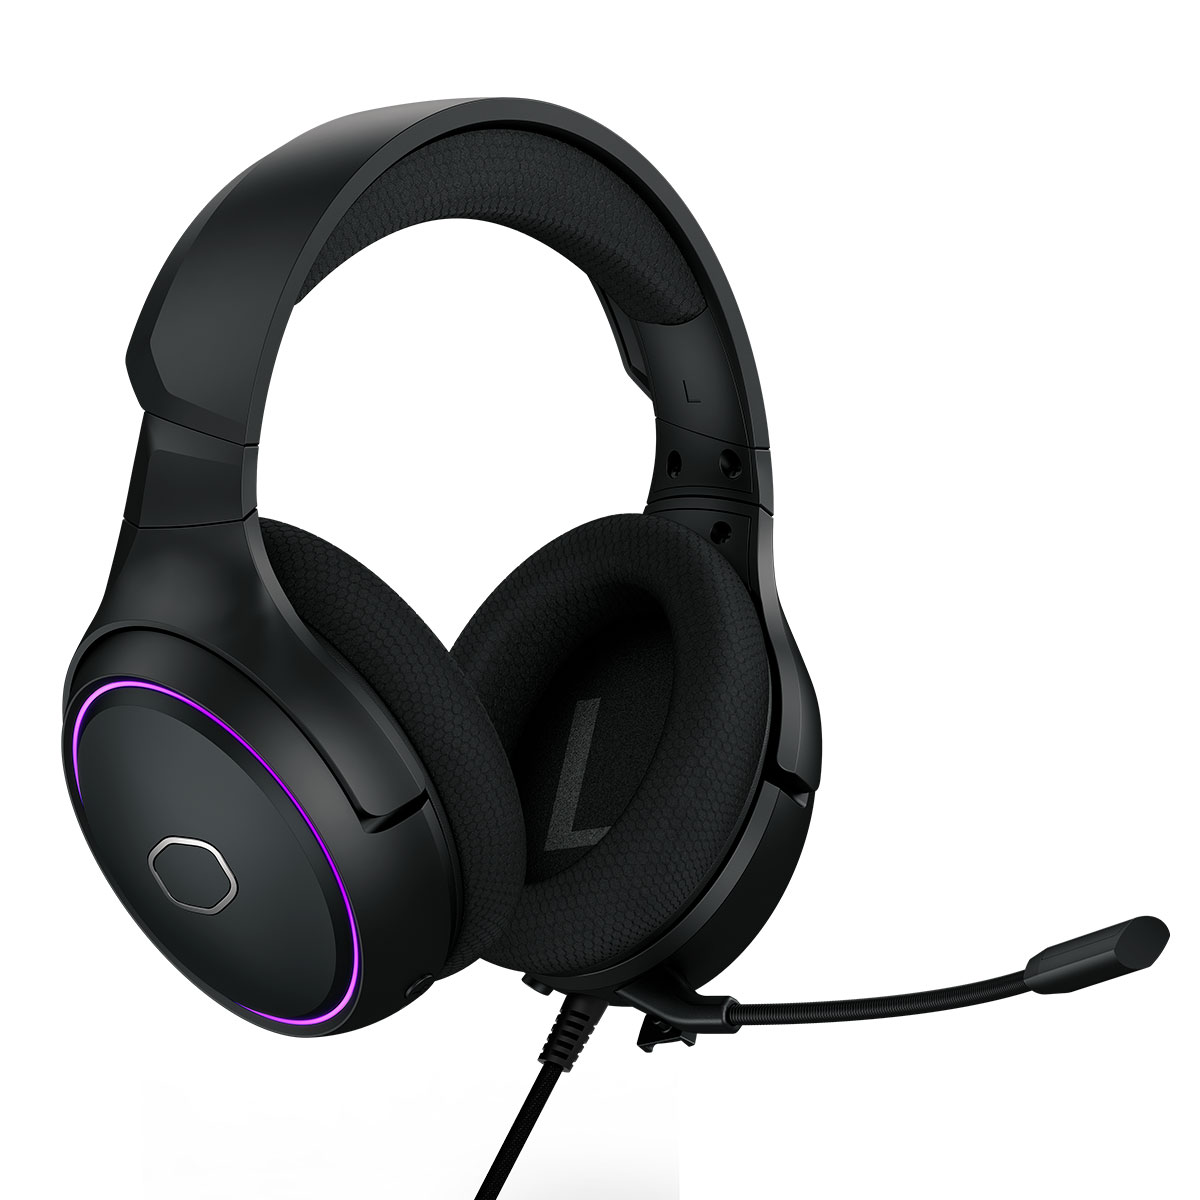 Headset Gamer Cooler Master MH650 - Conector USB - LED RGB - Compatível com PC / PS4 / Xbox One - MH-650